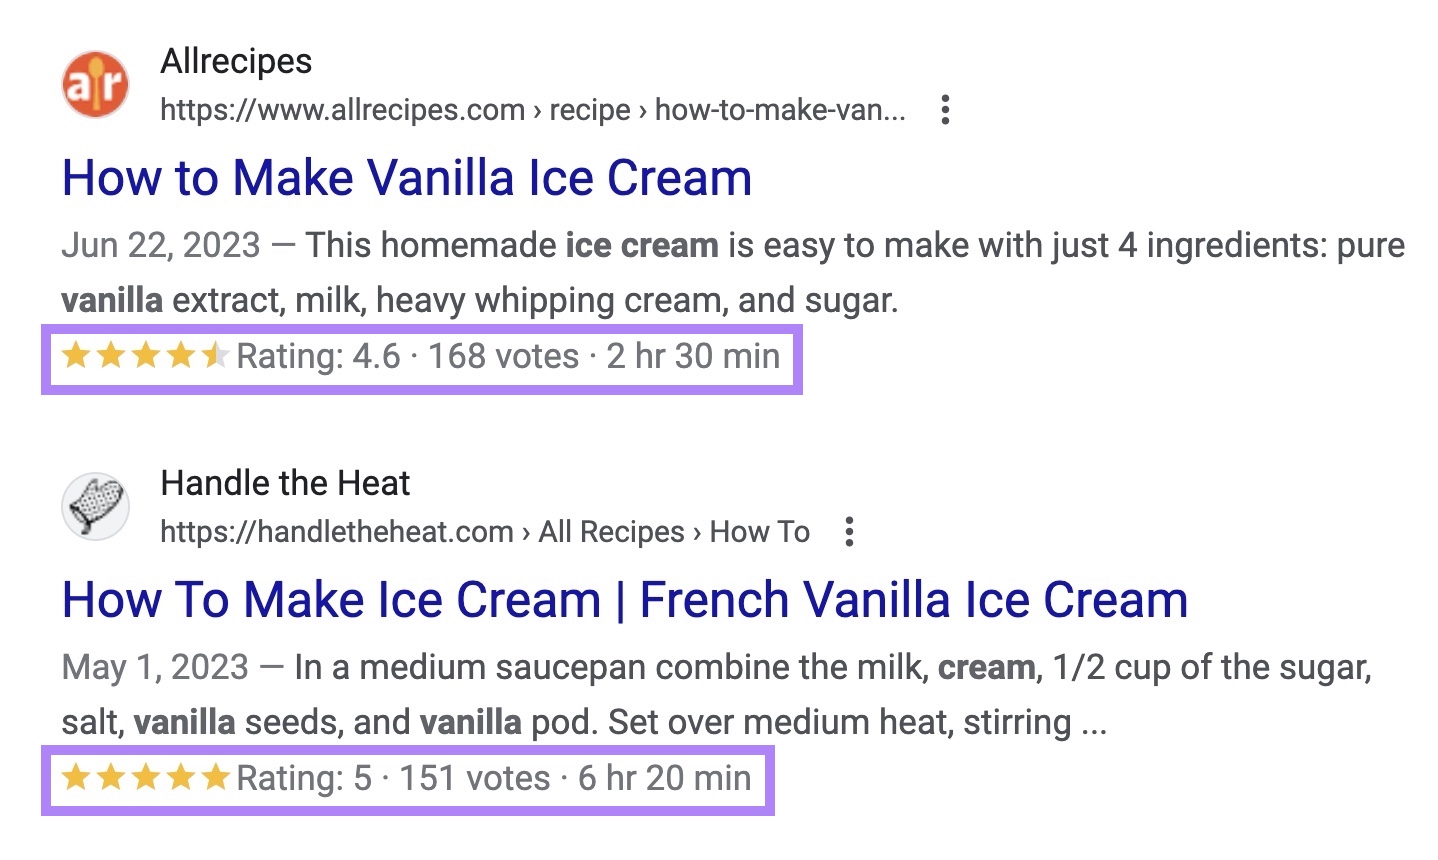 Rich results on SERP showing recipes with star ratings, the number of user votes, and an estimate of the time it takes to make the recipe